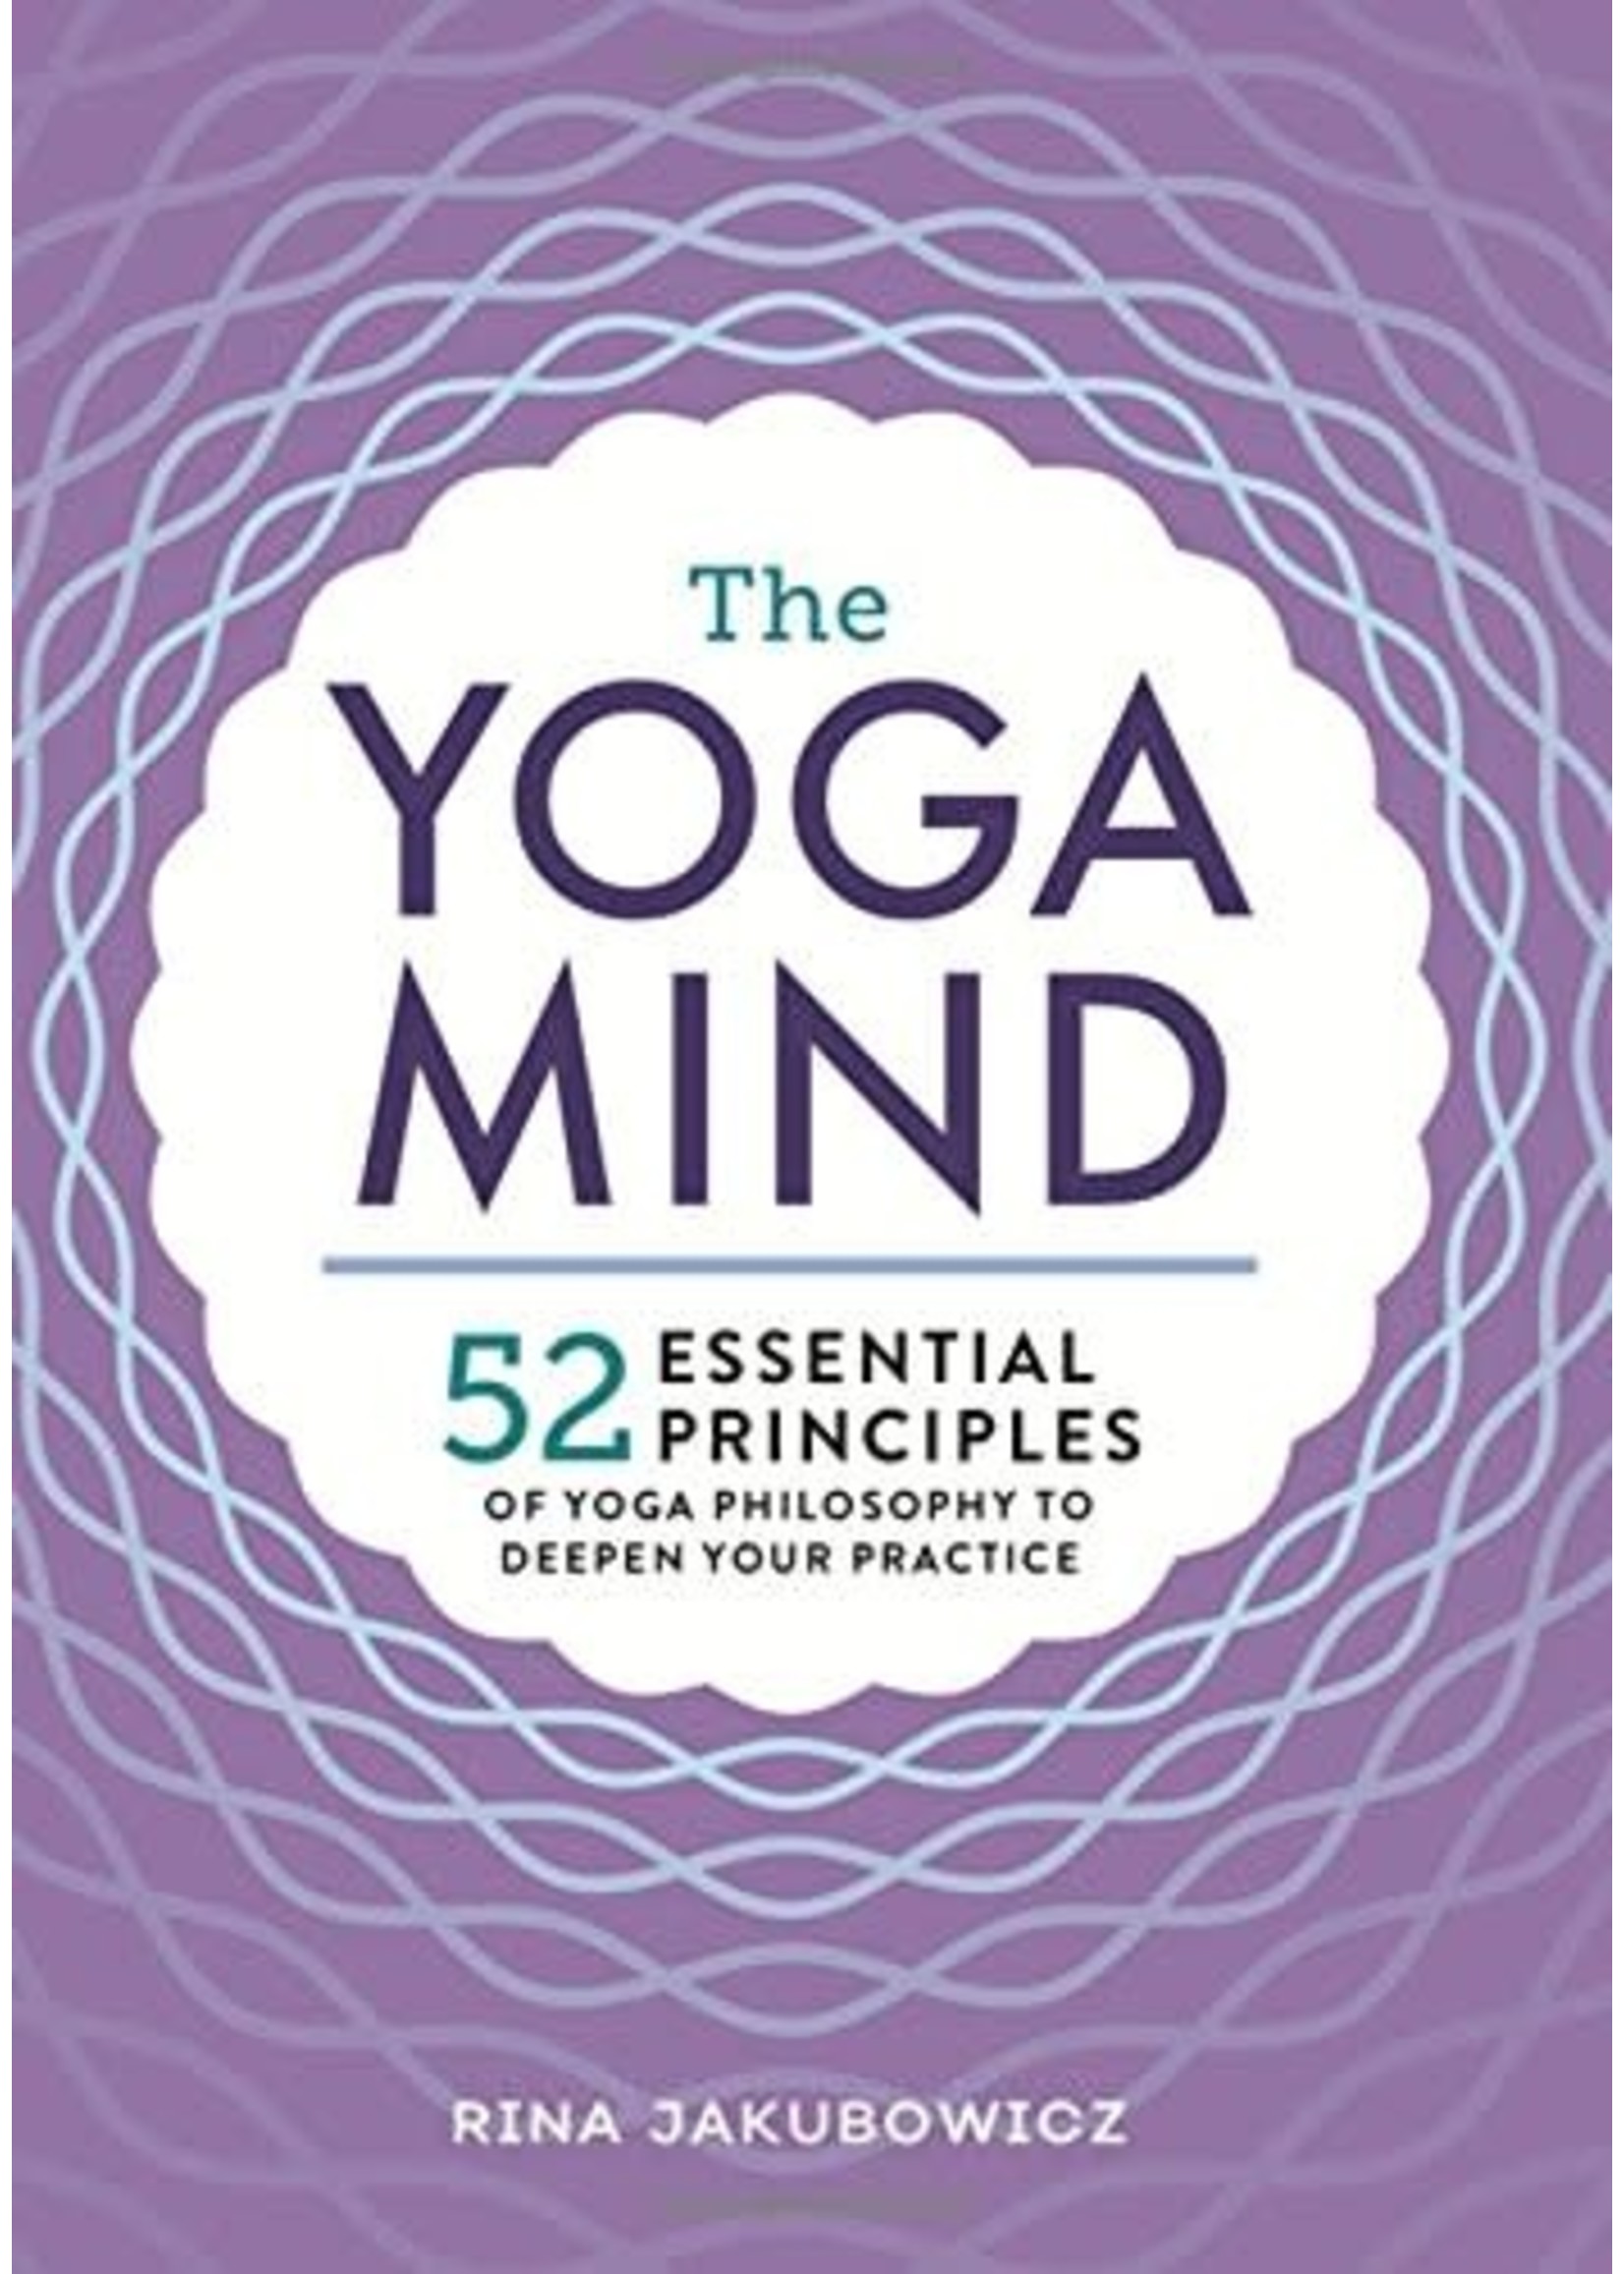 Yoga Mind: 52 Essential Principles of Yoga Philosophy to Deepen Your Practice